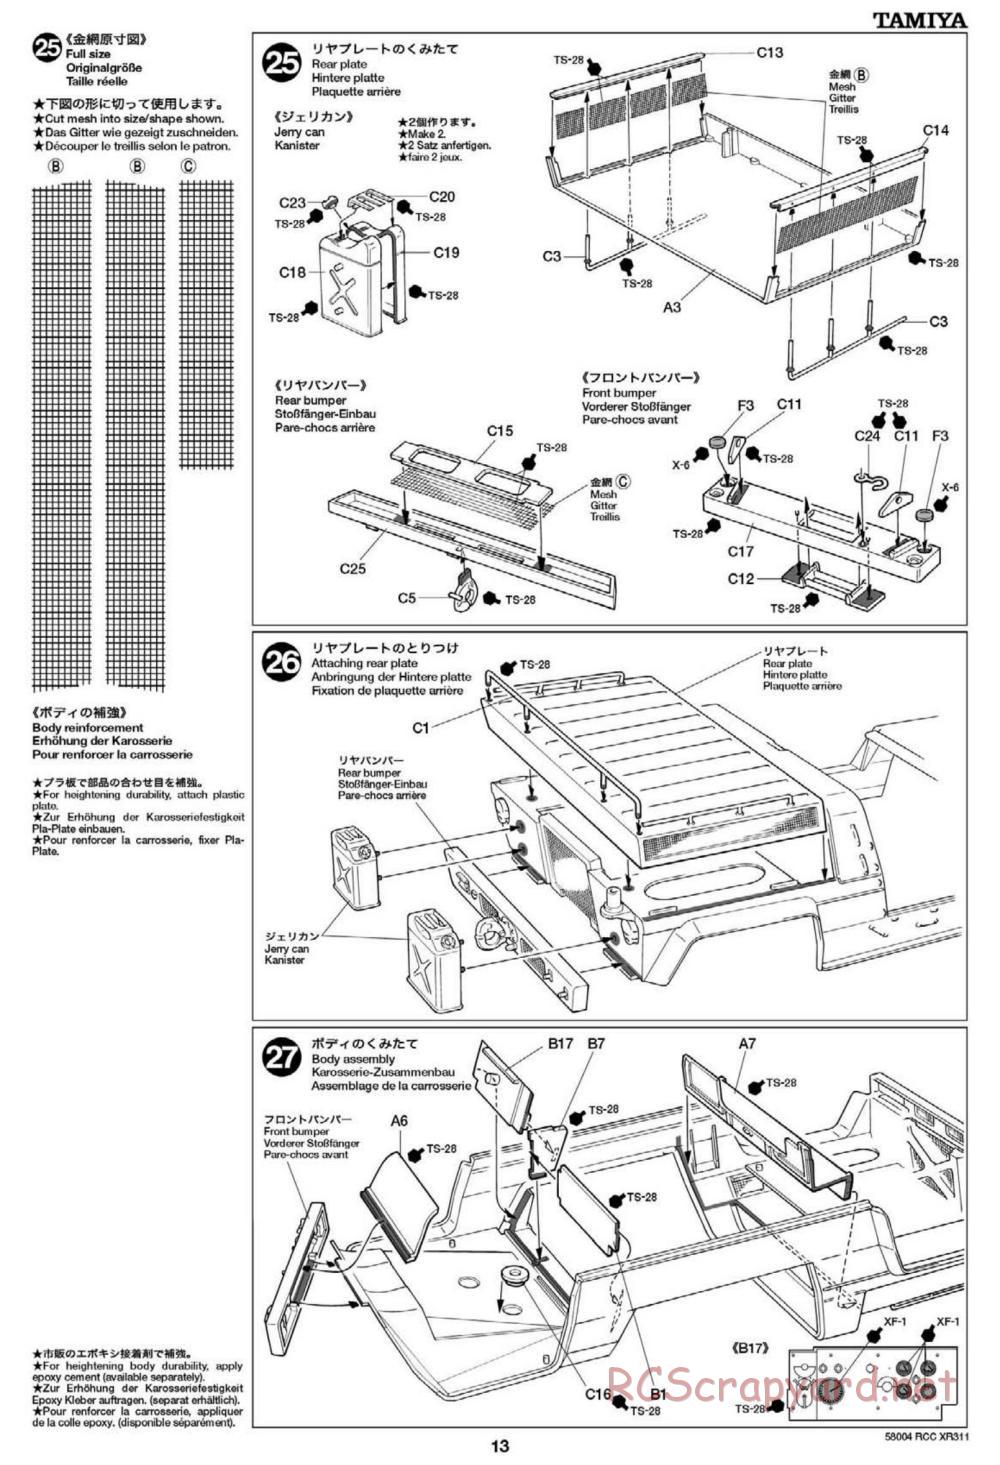 Tamiya - XR311 Combat Support Vehicle (2012) Chassis - Manual - Page 13